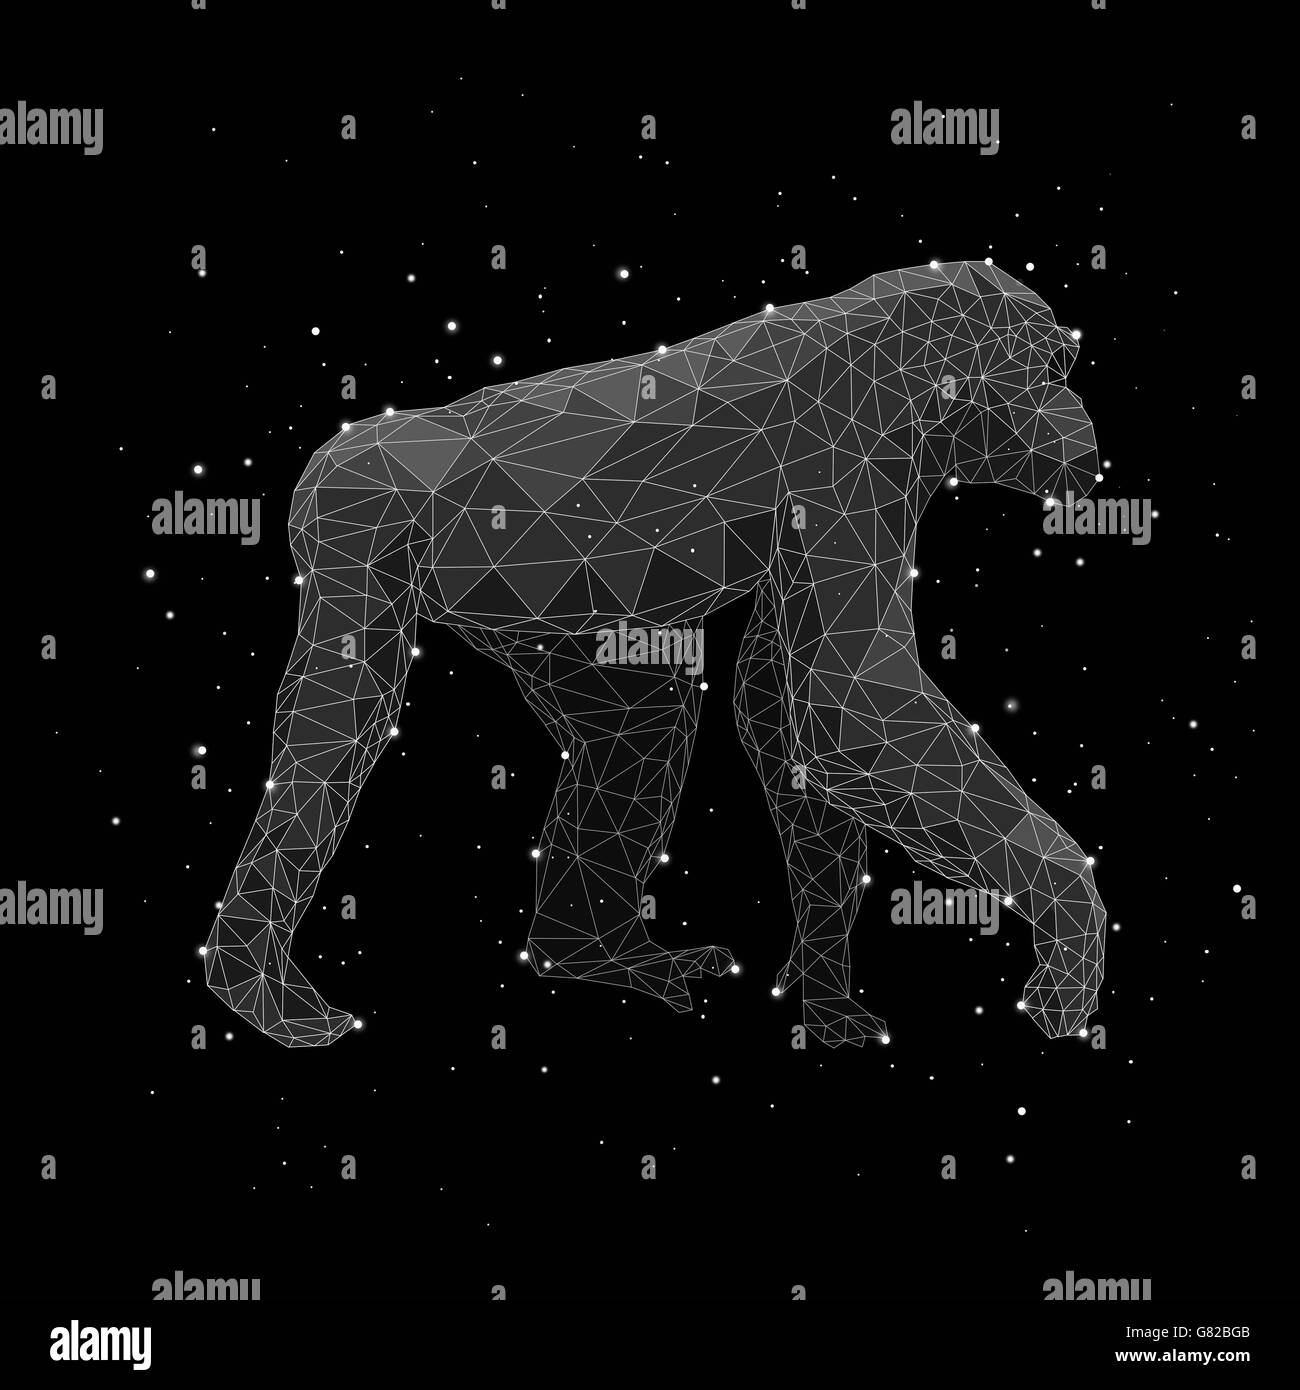 Digital composite image of constellation forming chimpanzee against black background Stock Photo